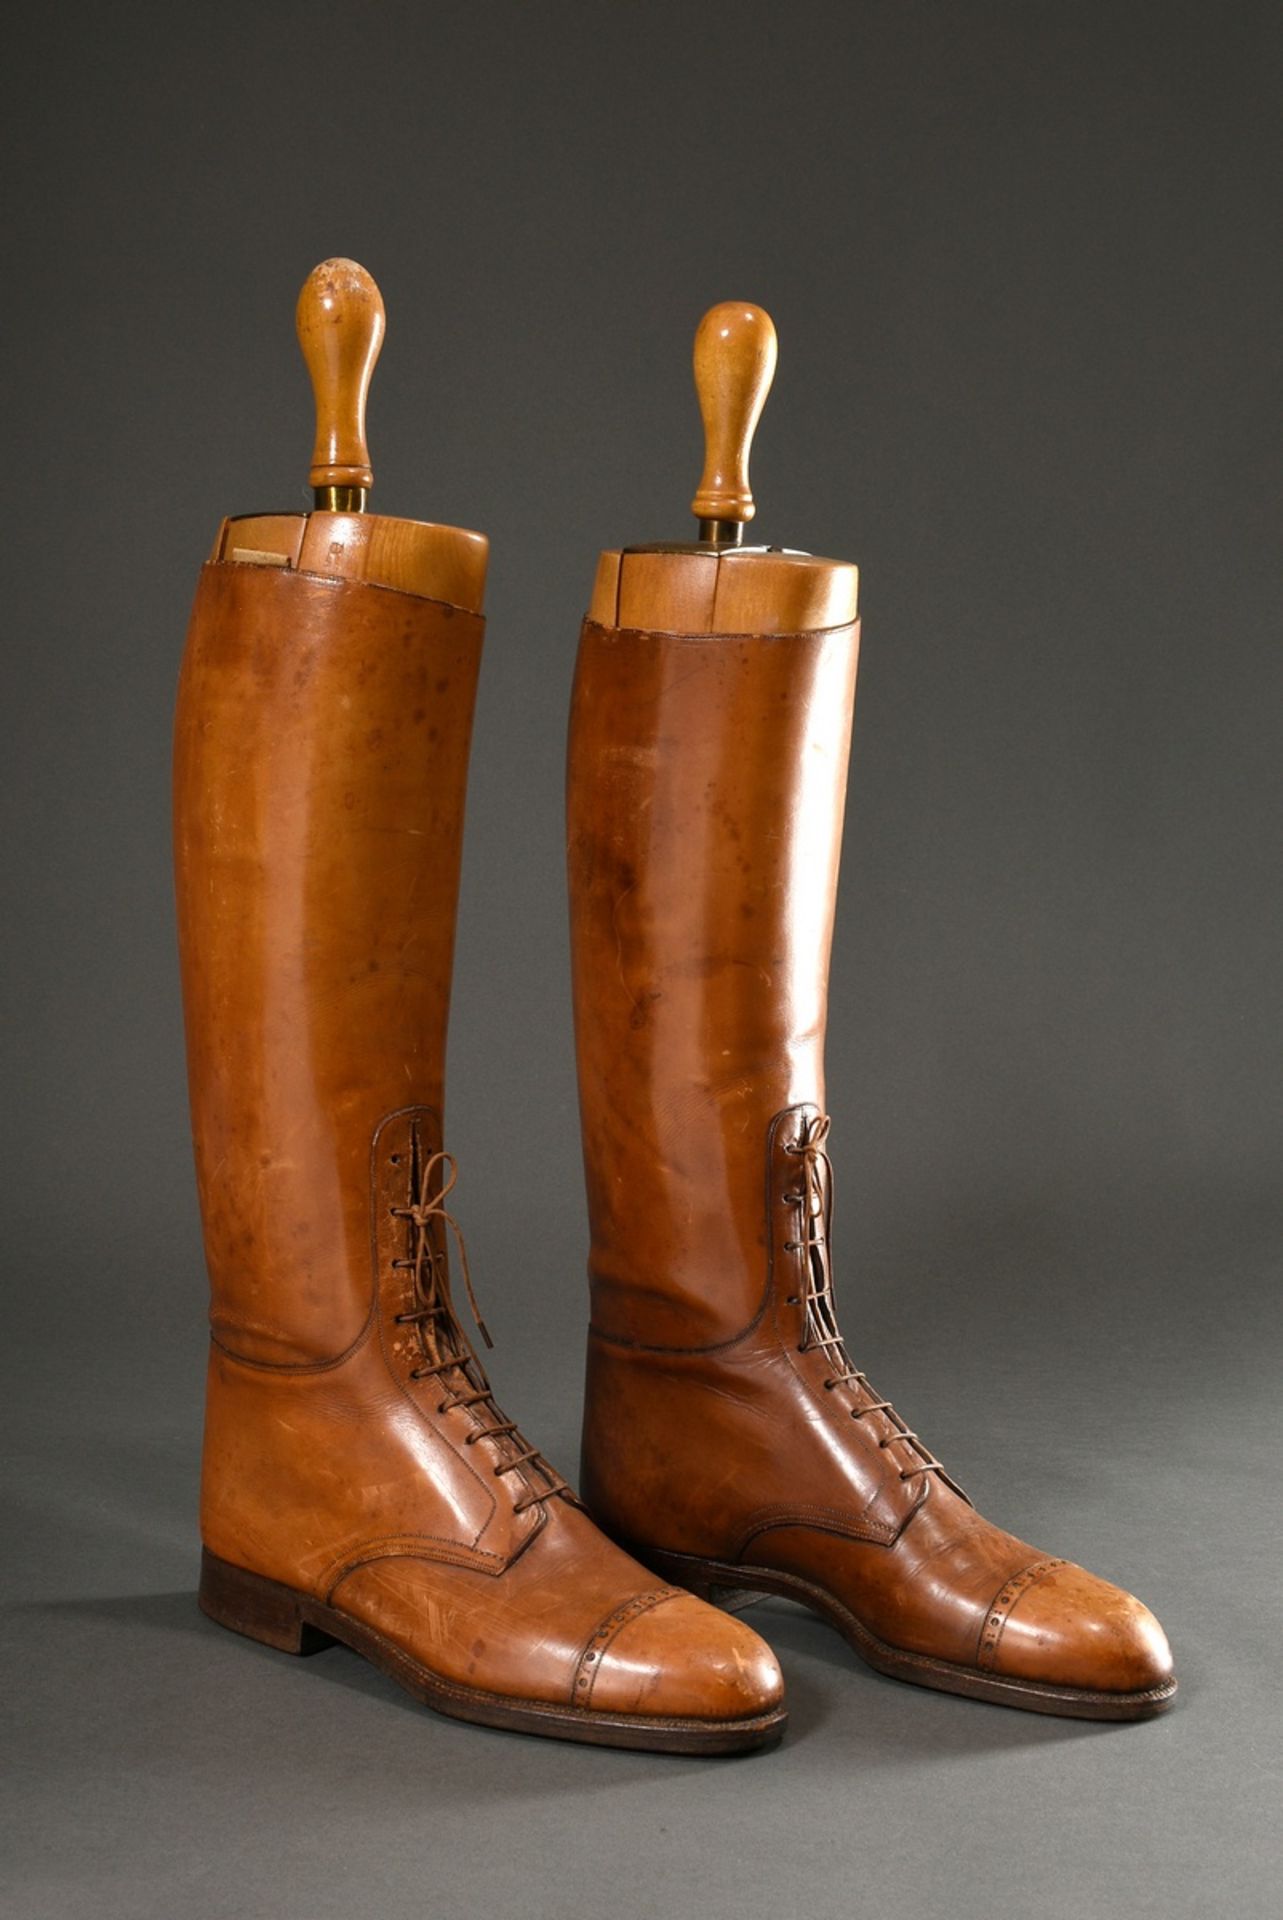 Pair of Edwardian polo boots "James Moore" with lacing and hole pattern, with inserted boot stretch - Image 2 of 8